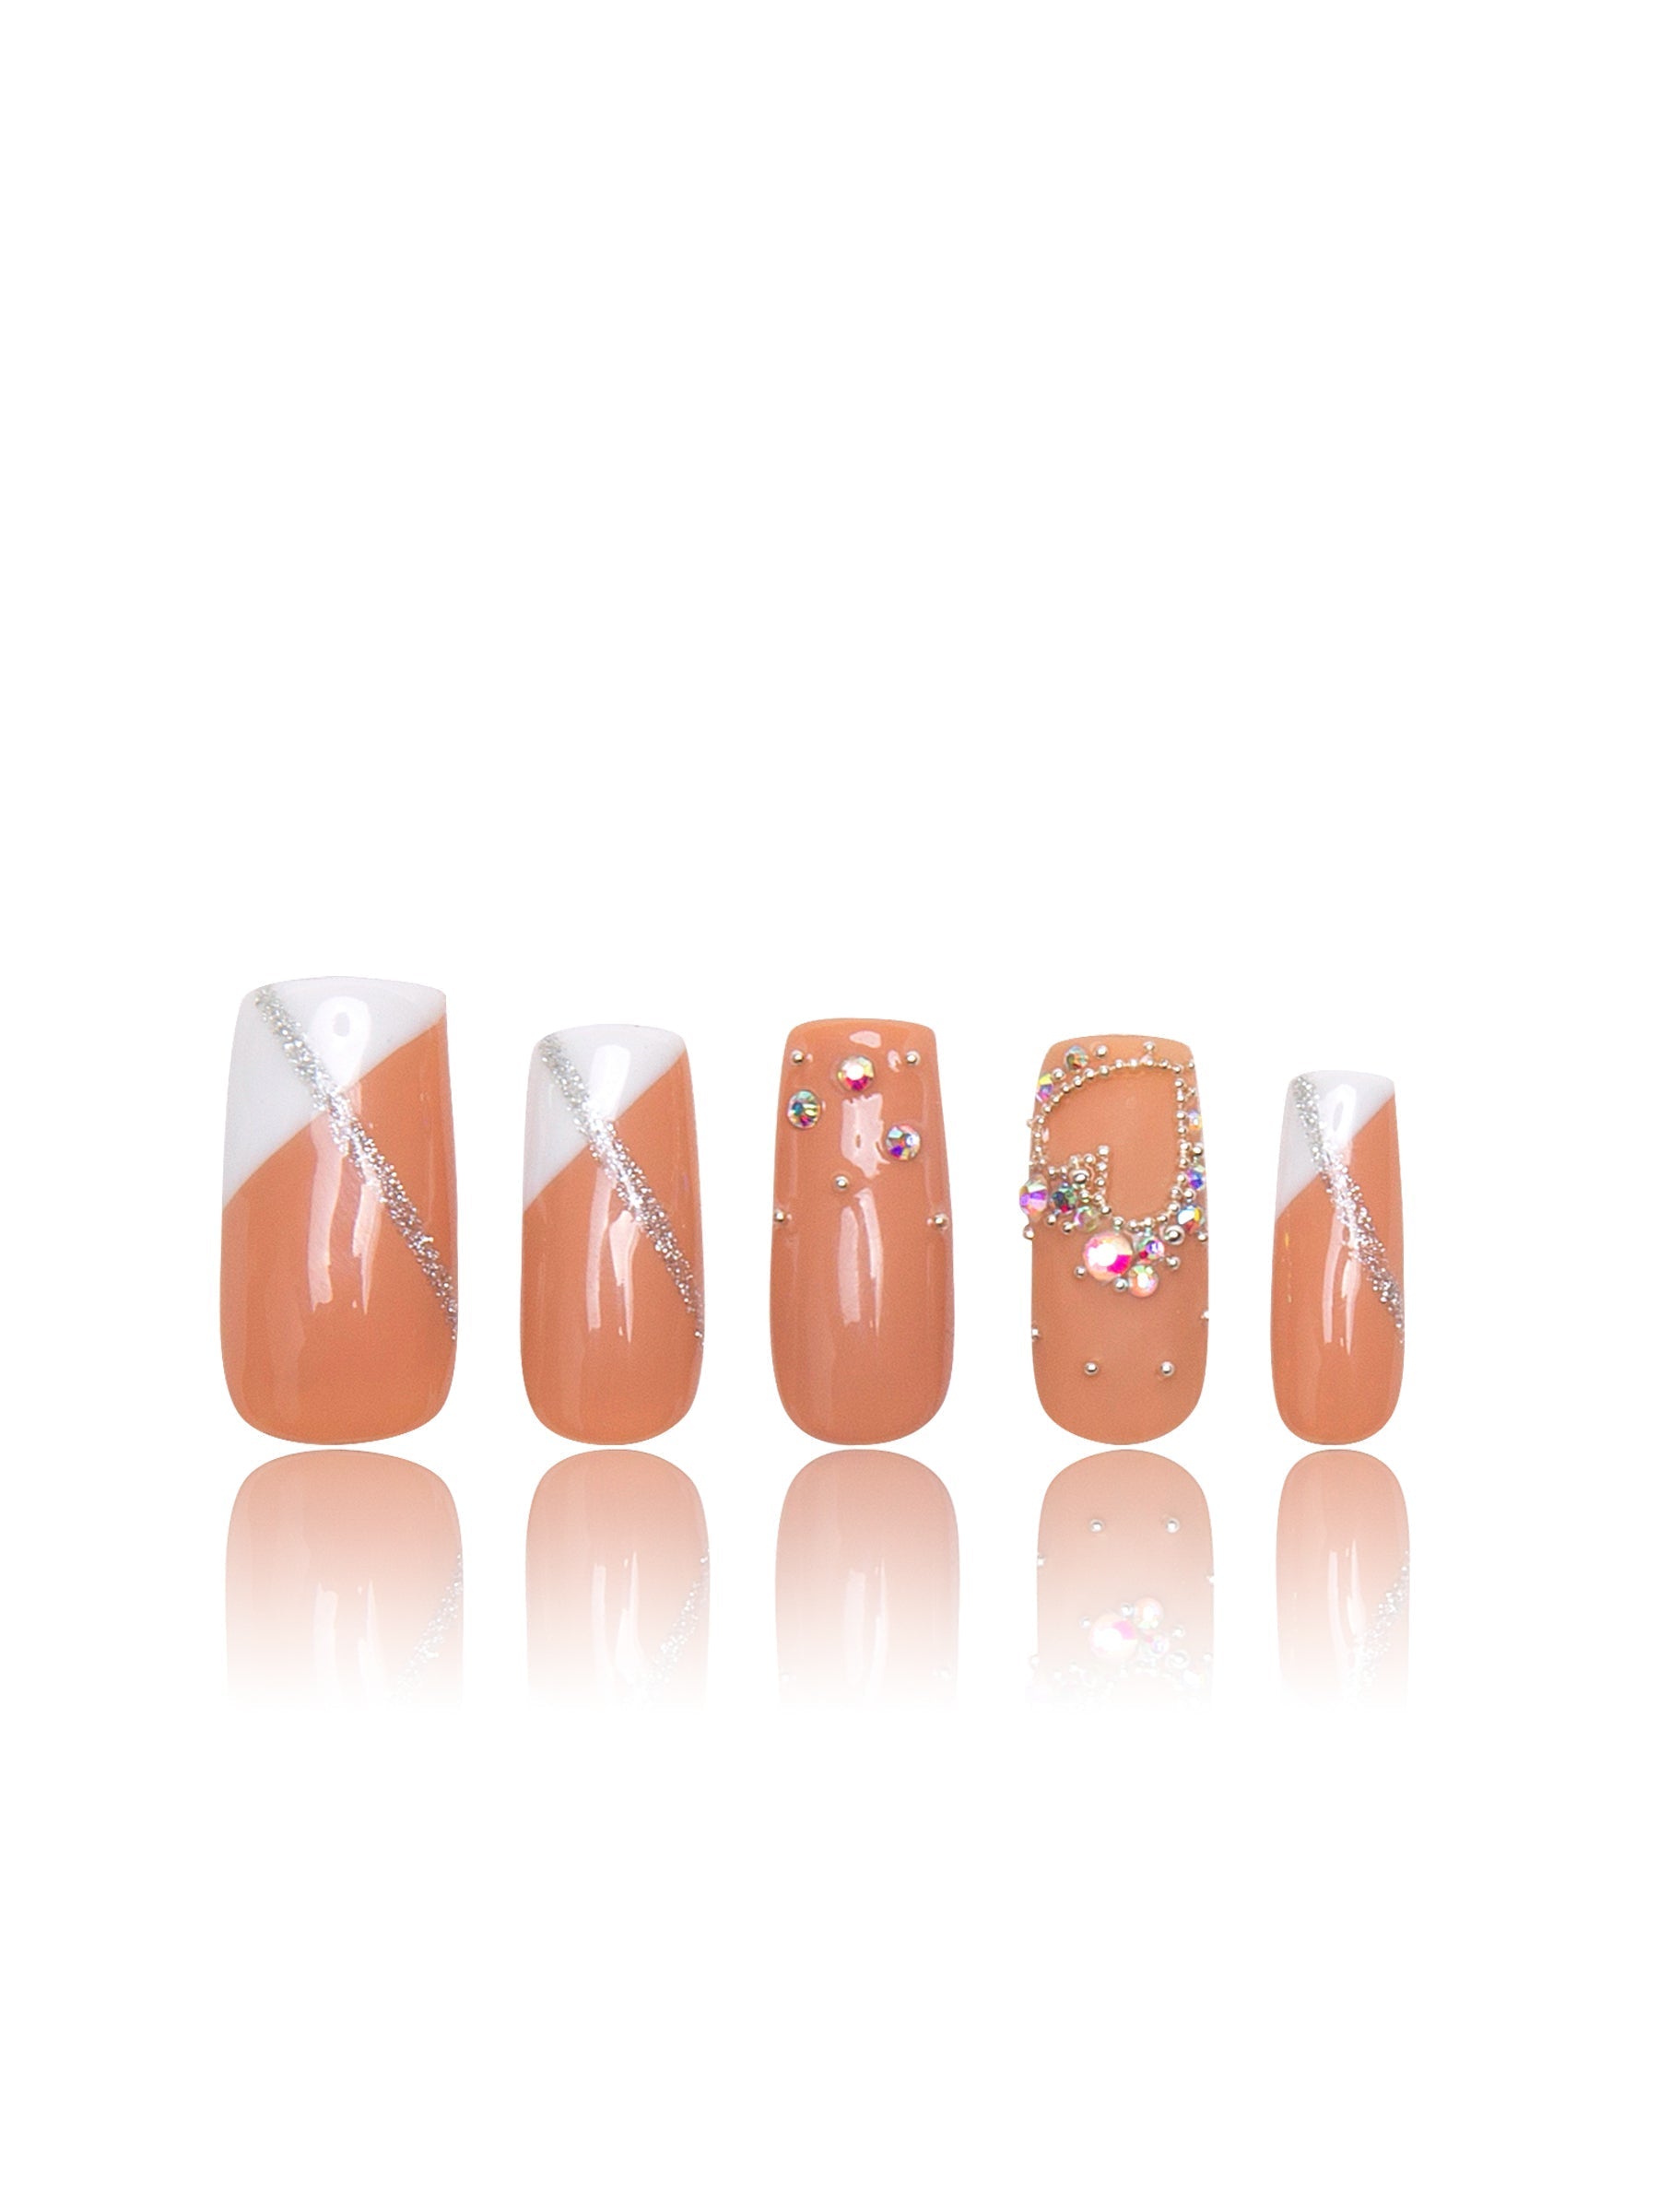 Set of Lovful press-on acrylic nails featuring clean white French tips on a warm neutral base with glitter and gemstone accents for an elegant, sweet, and sophisticated look.